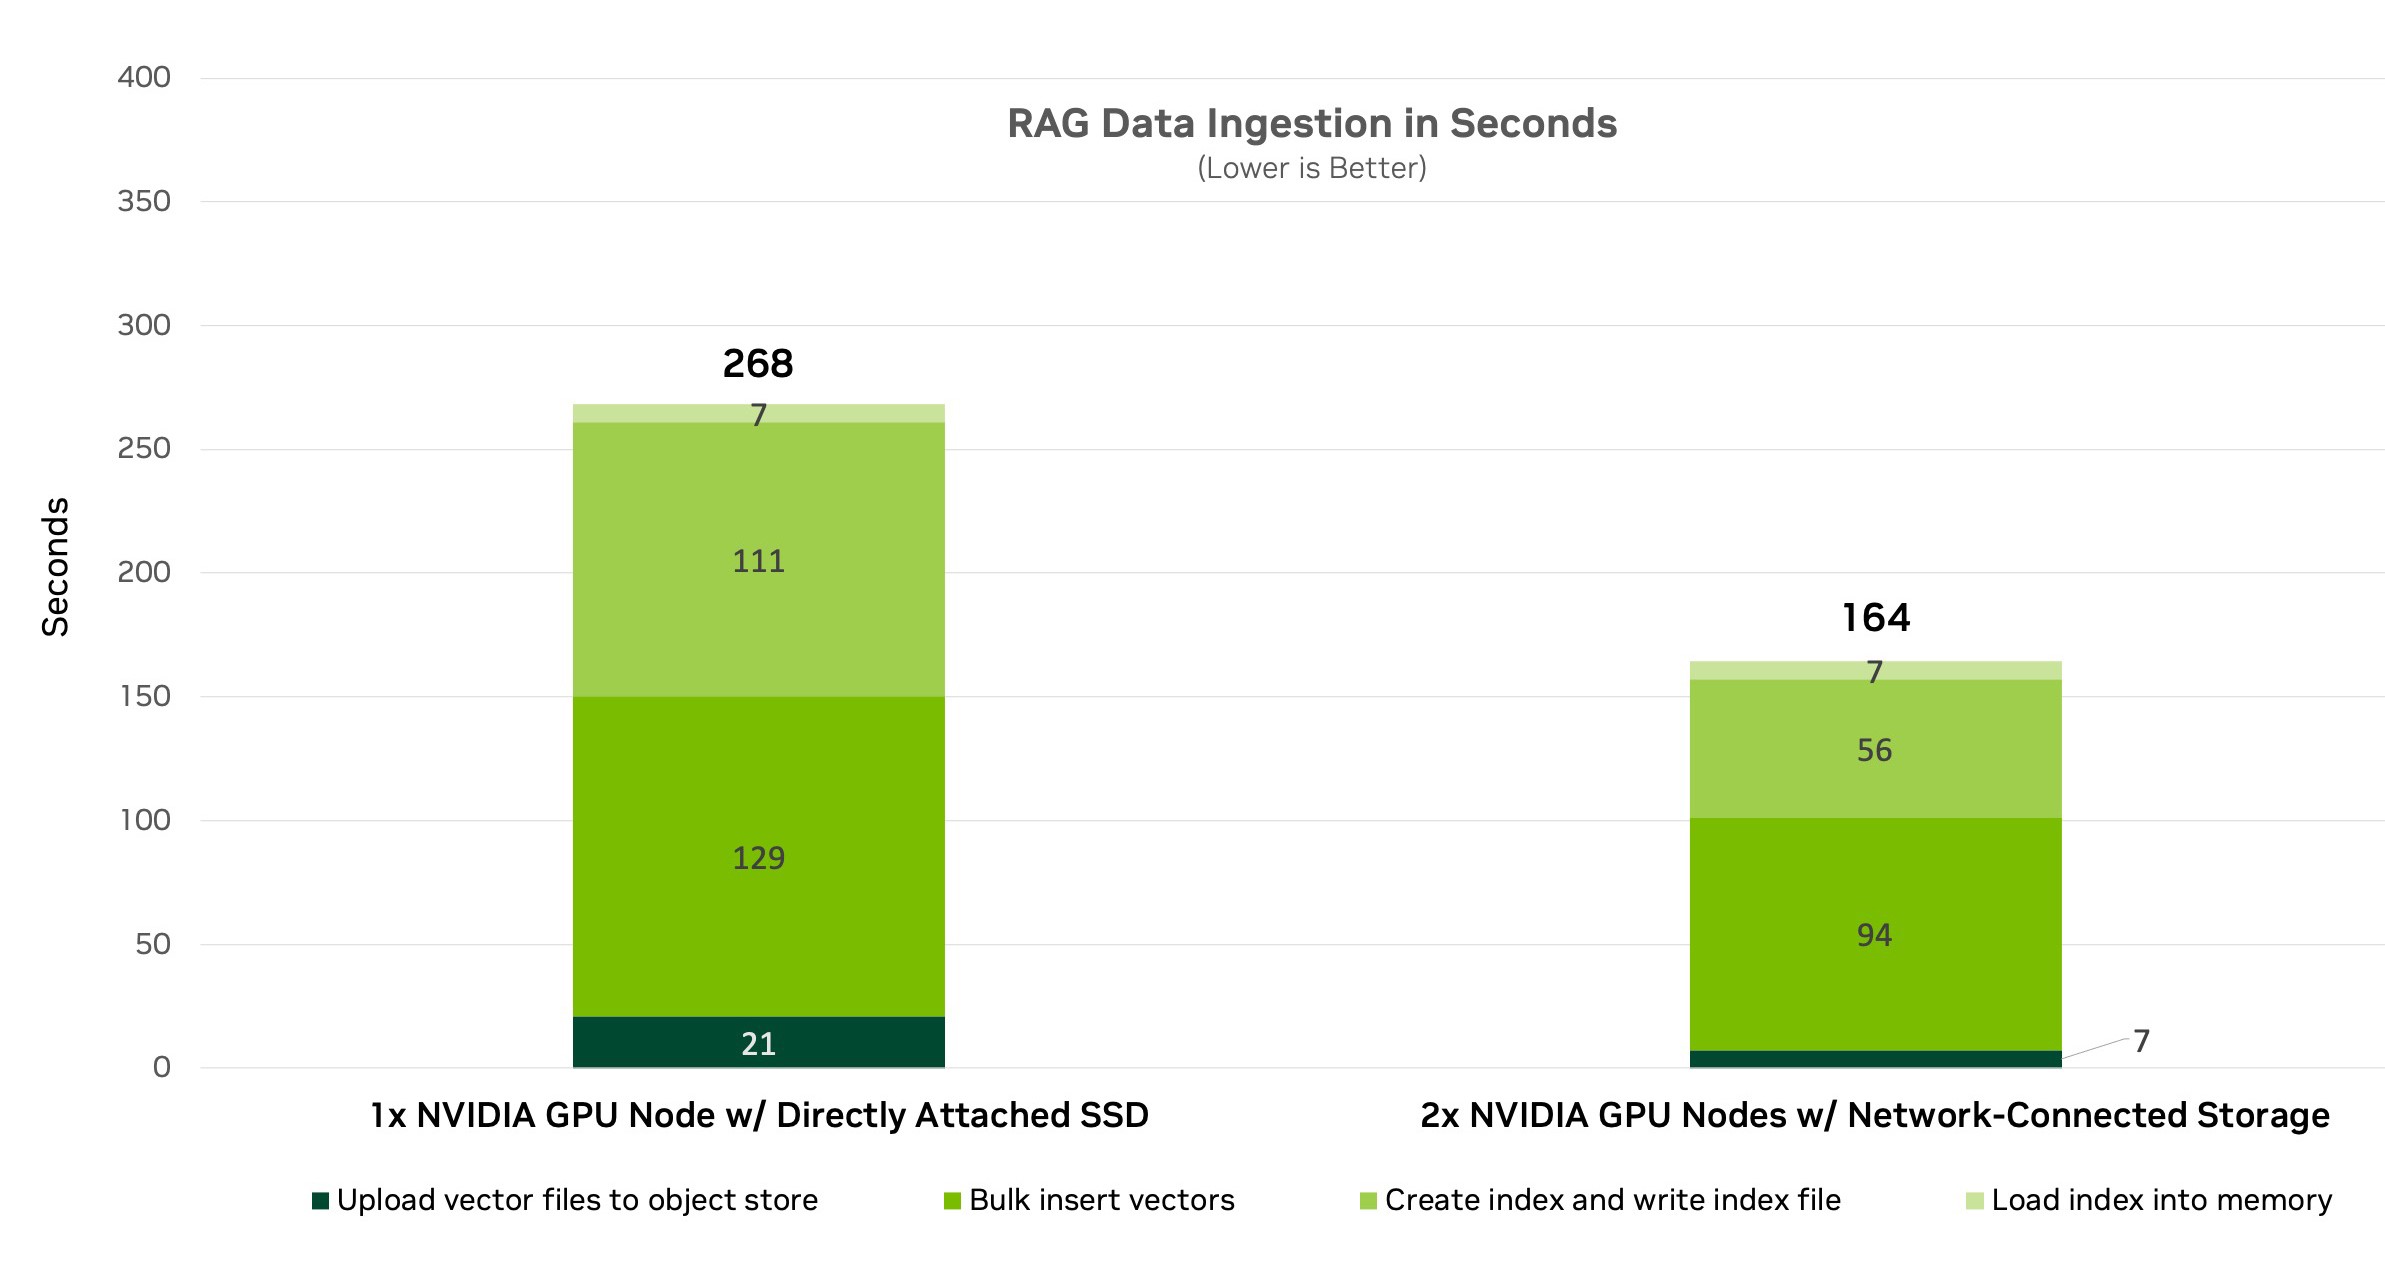 Stacked bar chart shows that the data ingestion workload was finished in 268 seconds by 1x NVIDIA GPU node with directly attached SSD, and in 167 seconds by 2x GPU nodes with network-connected storage. 